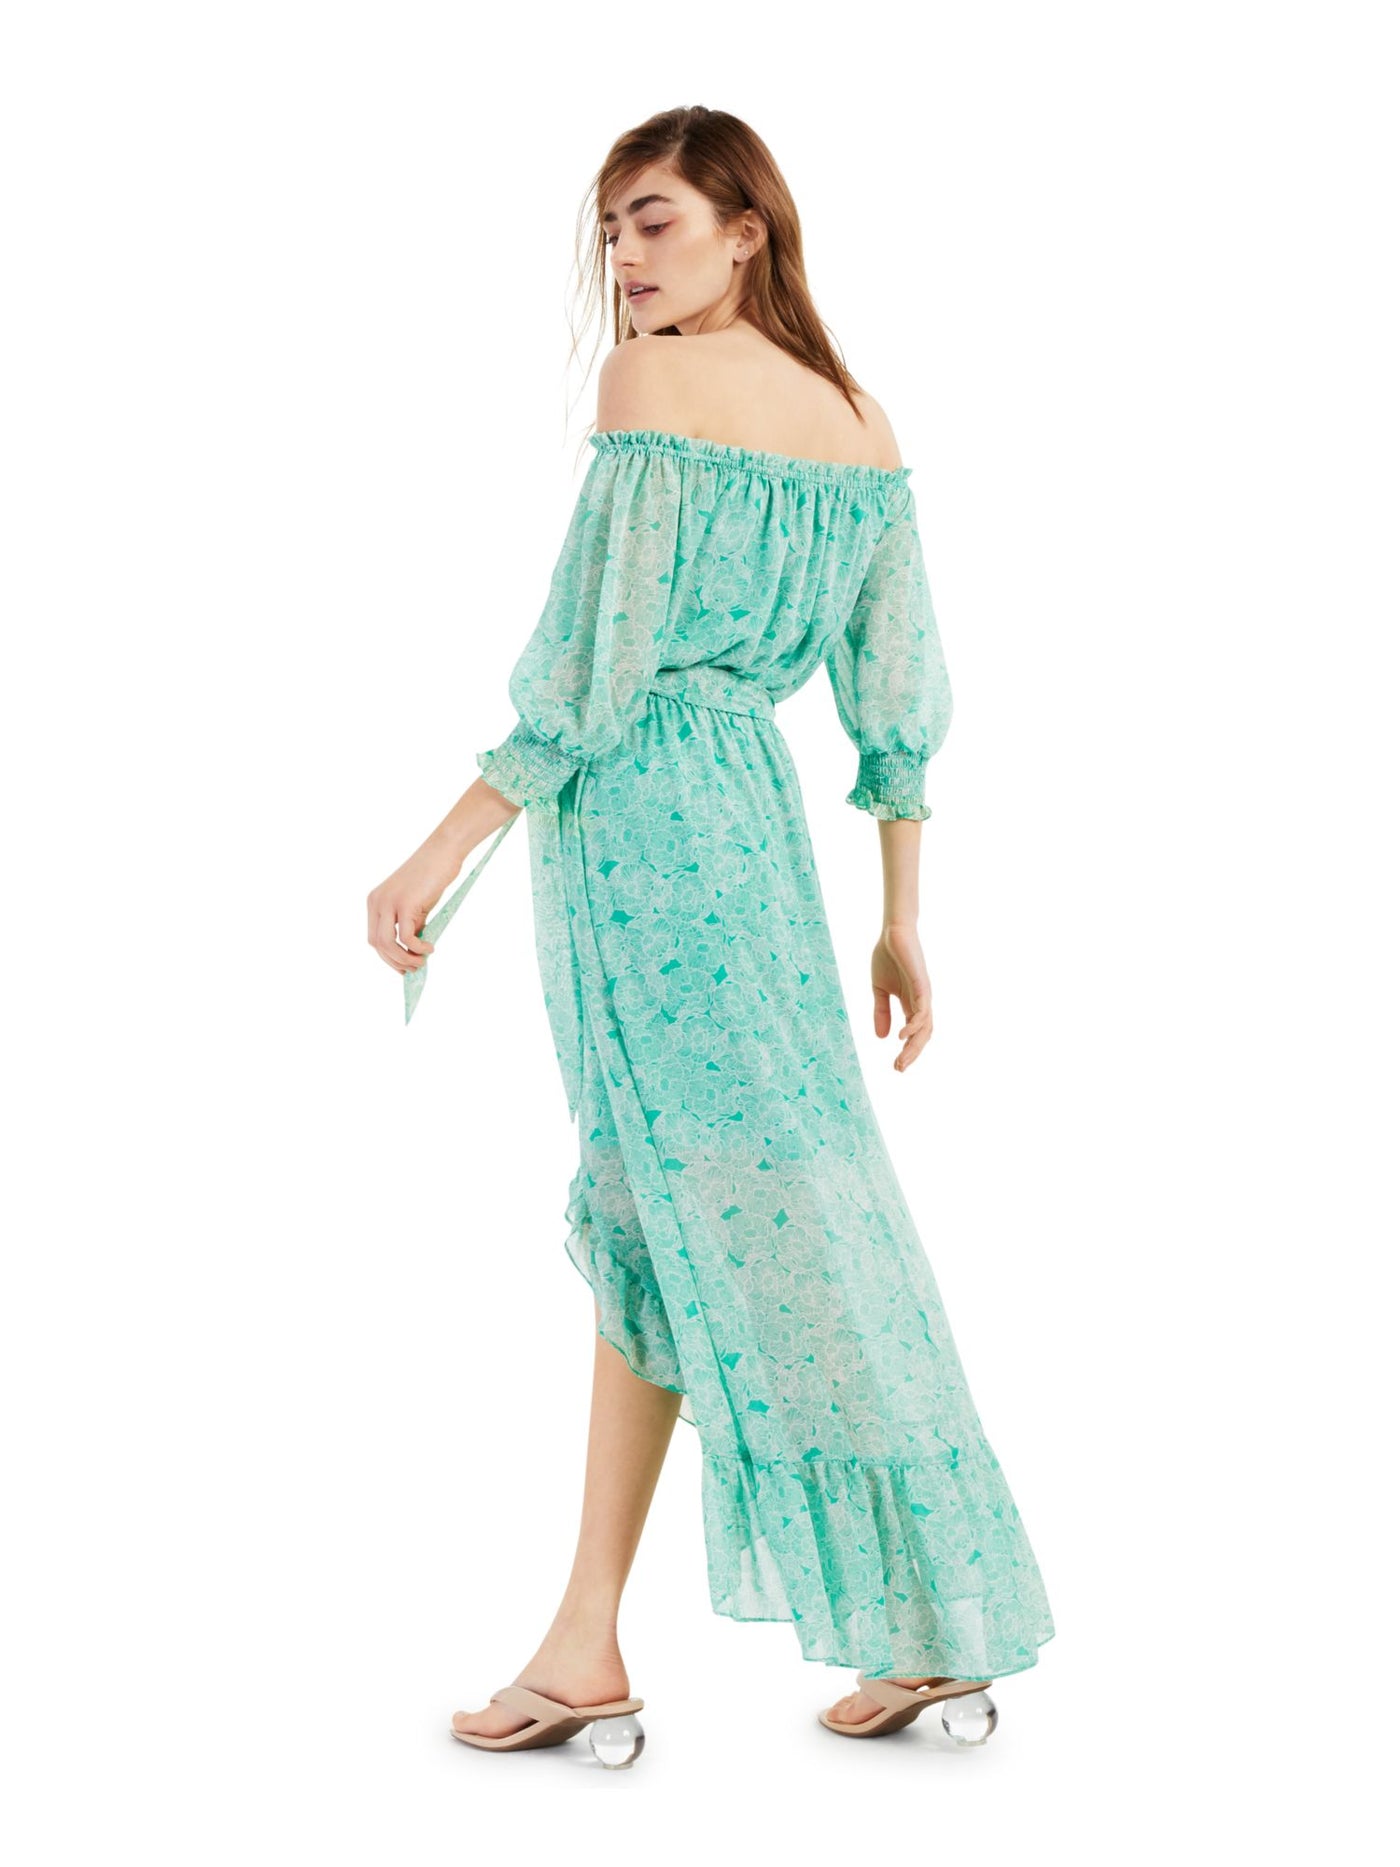 BAR III DRESSES Womens Green Ruffled Belted Pull-over Style Smocked Cuffs Floral 3/4 Sleeve Off Shoulder Maxi Hi-Lo Dress XL